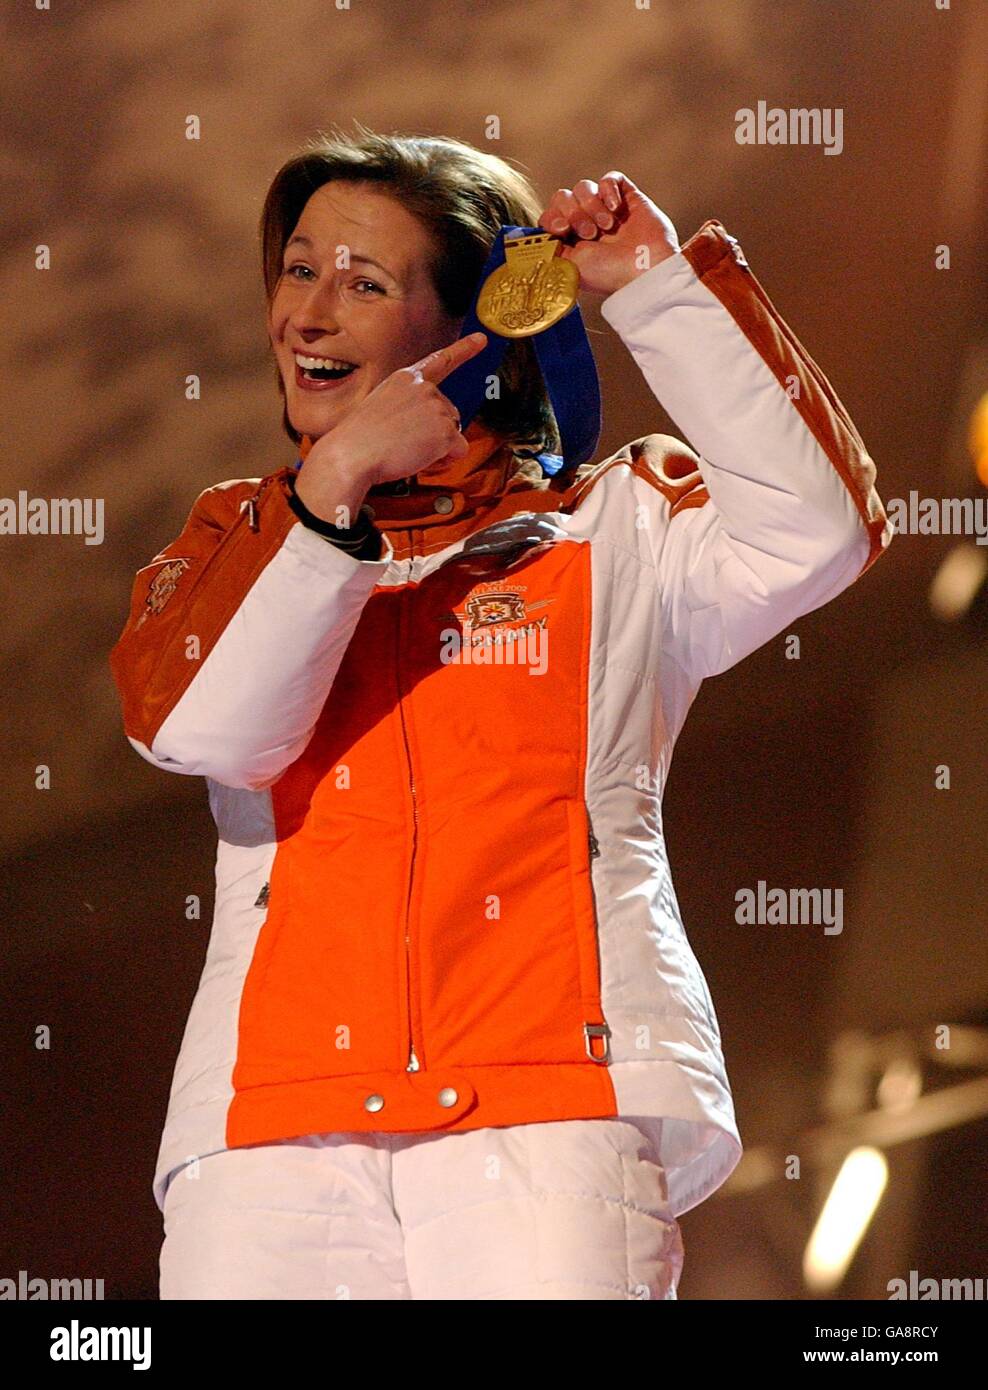 Winter Olympics - Salt Lake City 2002 - Medal Ceremony's - Speed Skating - Women's 5000m. Germany's Claudia Pechstein celebrates with her gold medal Stock Photo